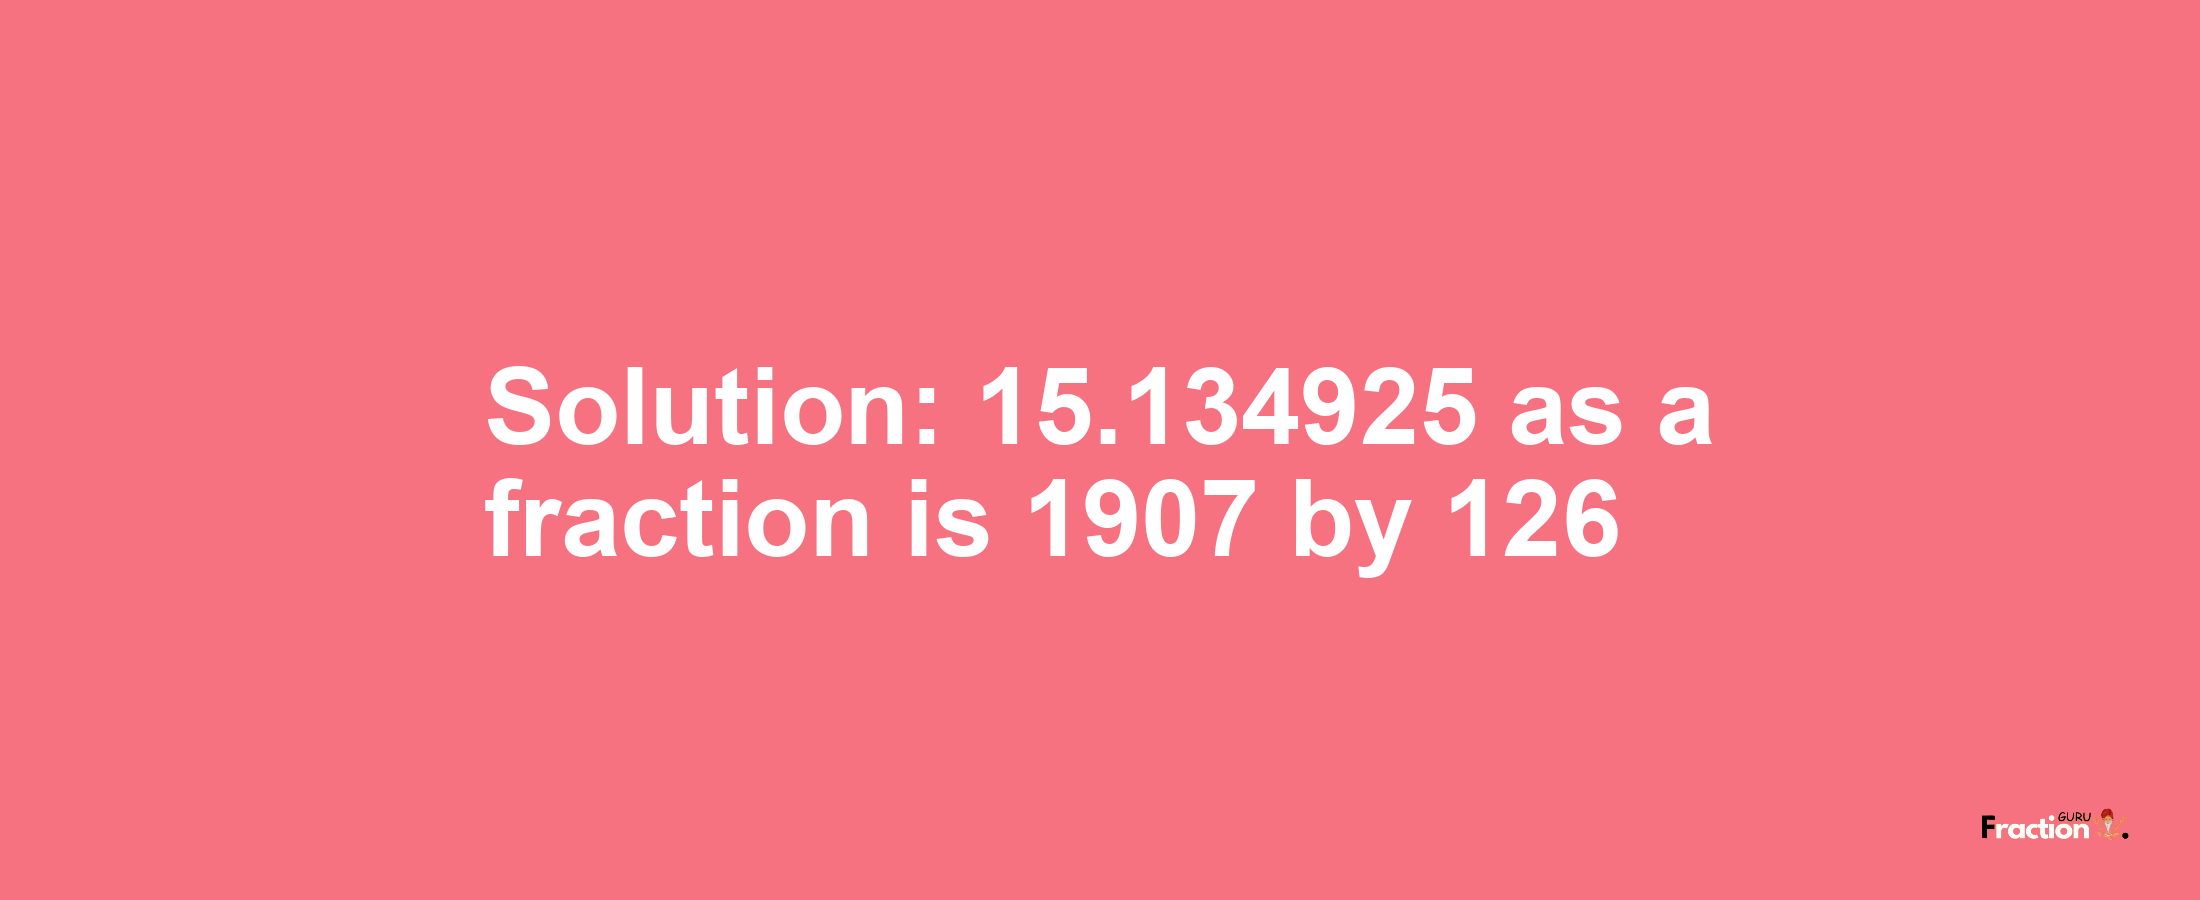 Solution:15.134925 as a fraction is 1907/126